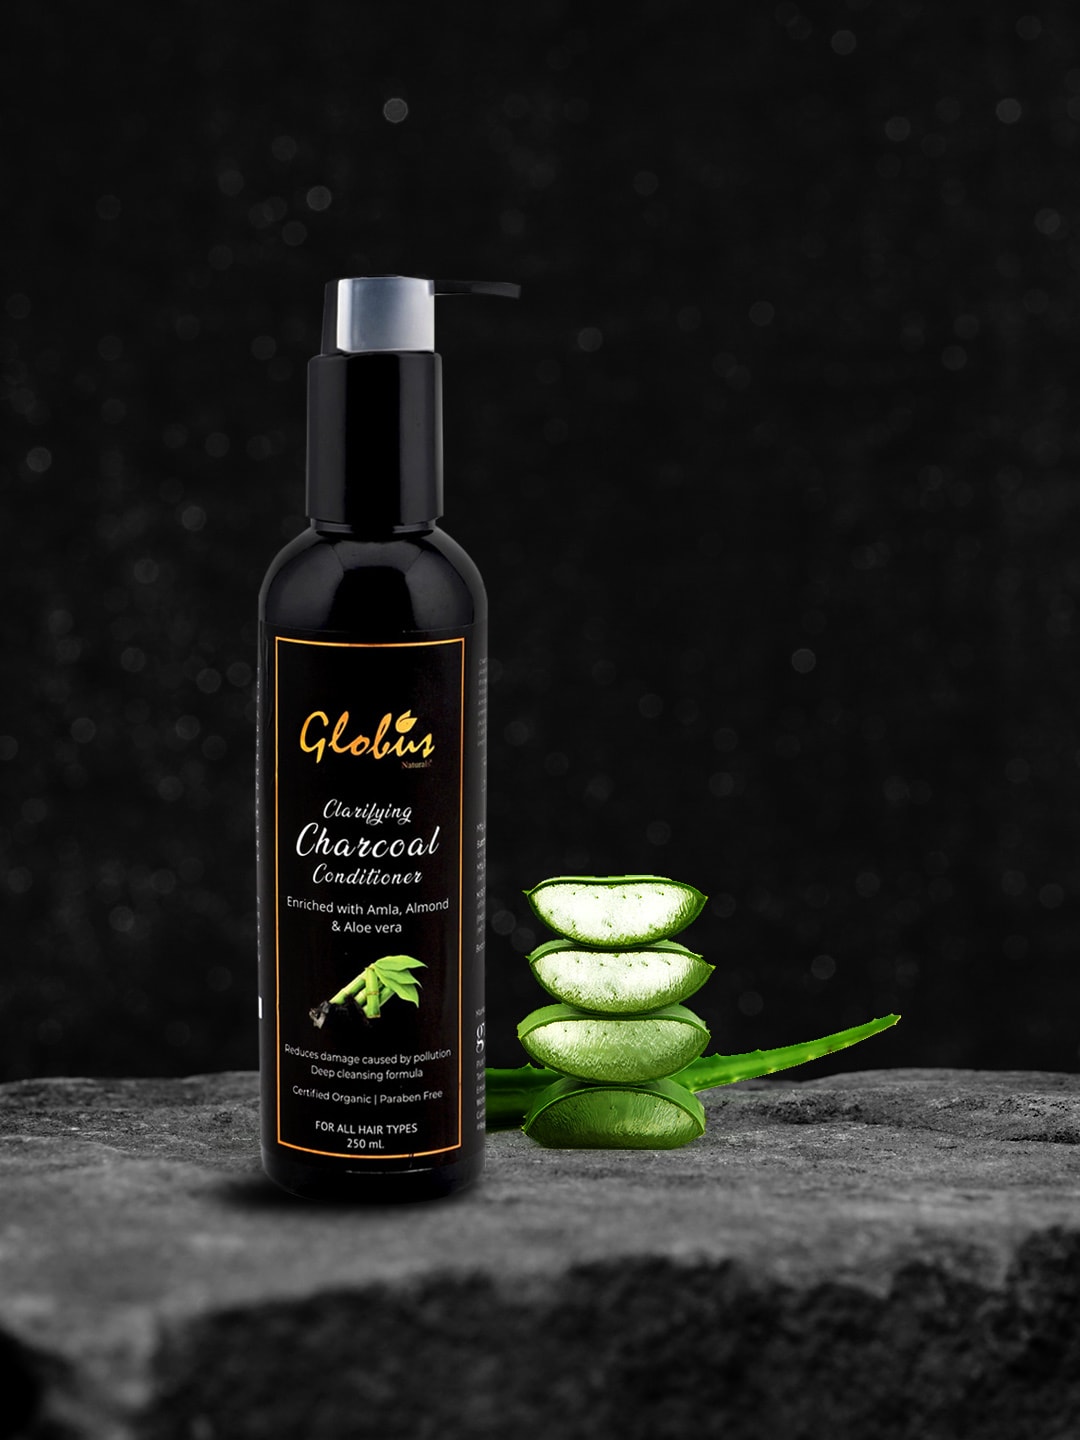 Globus Naturals Clarifying Charcoal Conditioner 250 ml Price in India